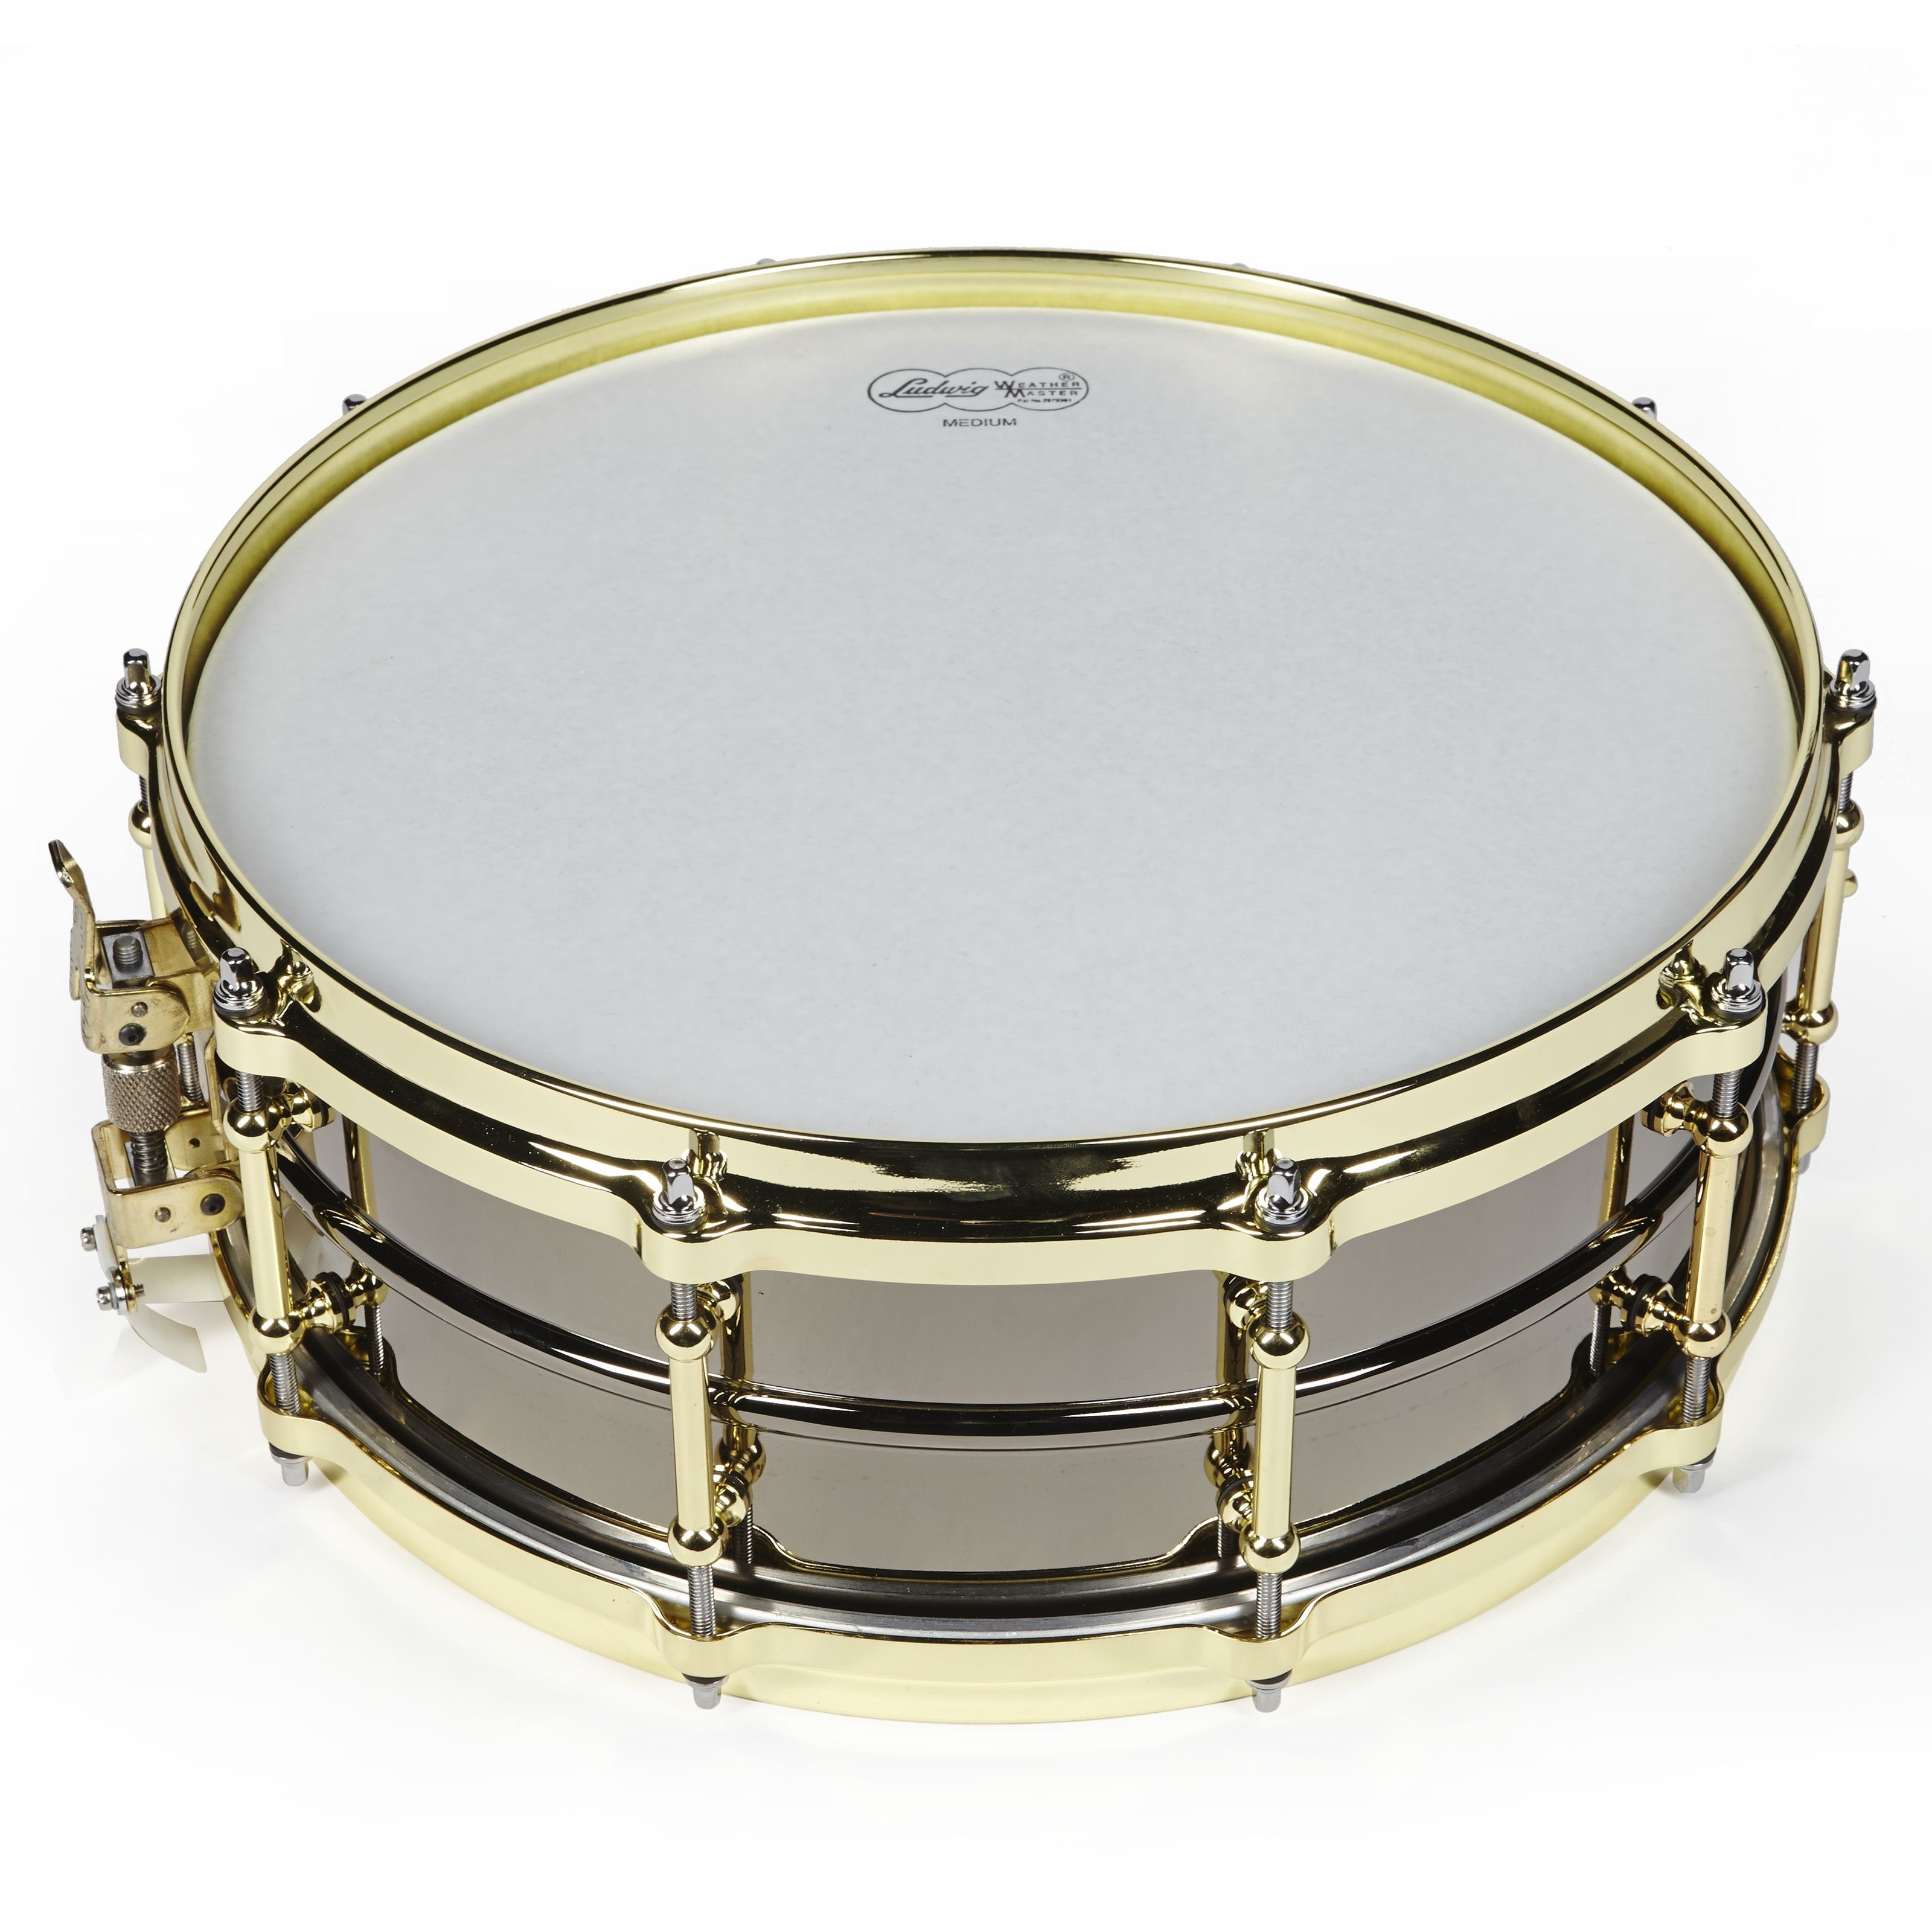 Ludwig Snare Drum,Black Beauty Snare LB416BT 14"x5", Brass Tube Lugs P86, Black Beauty Snare LB416BT 14"x5", Brass Tube Lugs P86 - Snare Drum